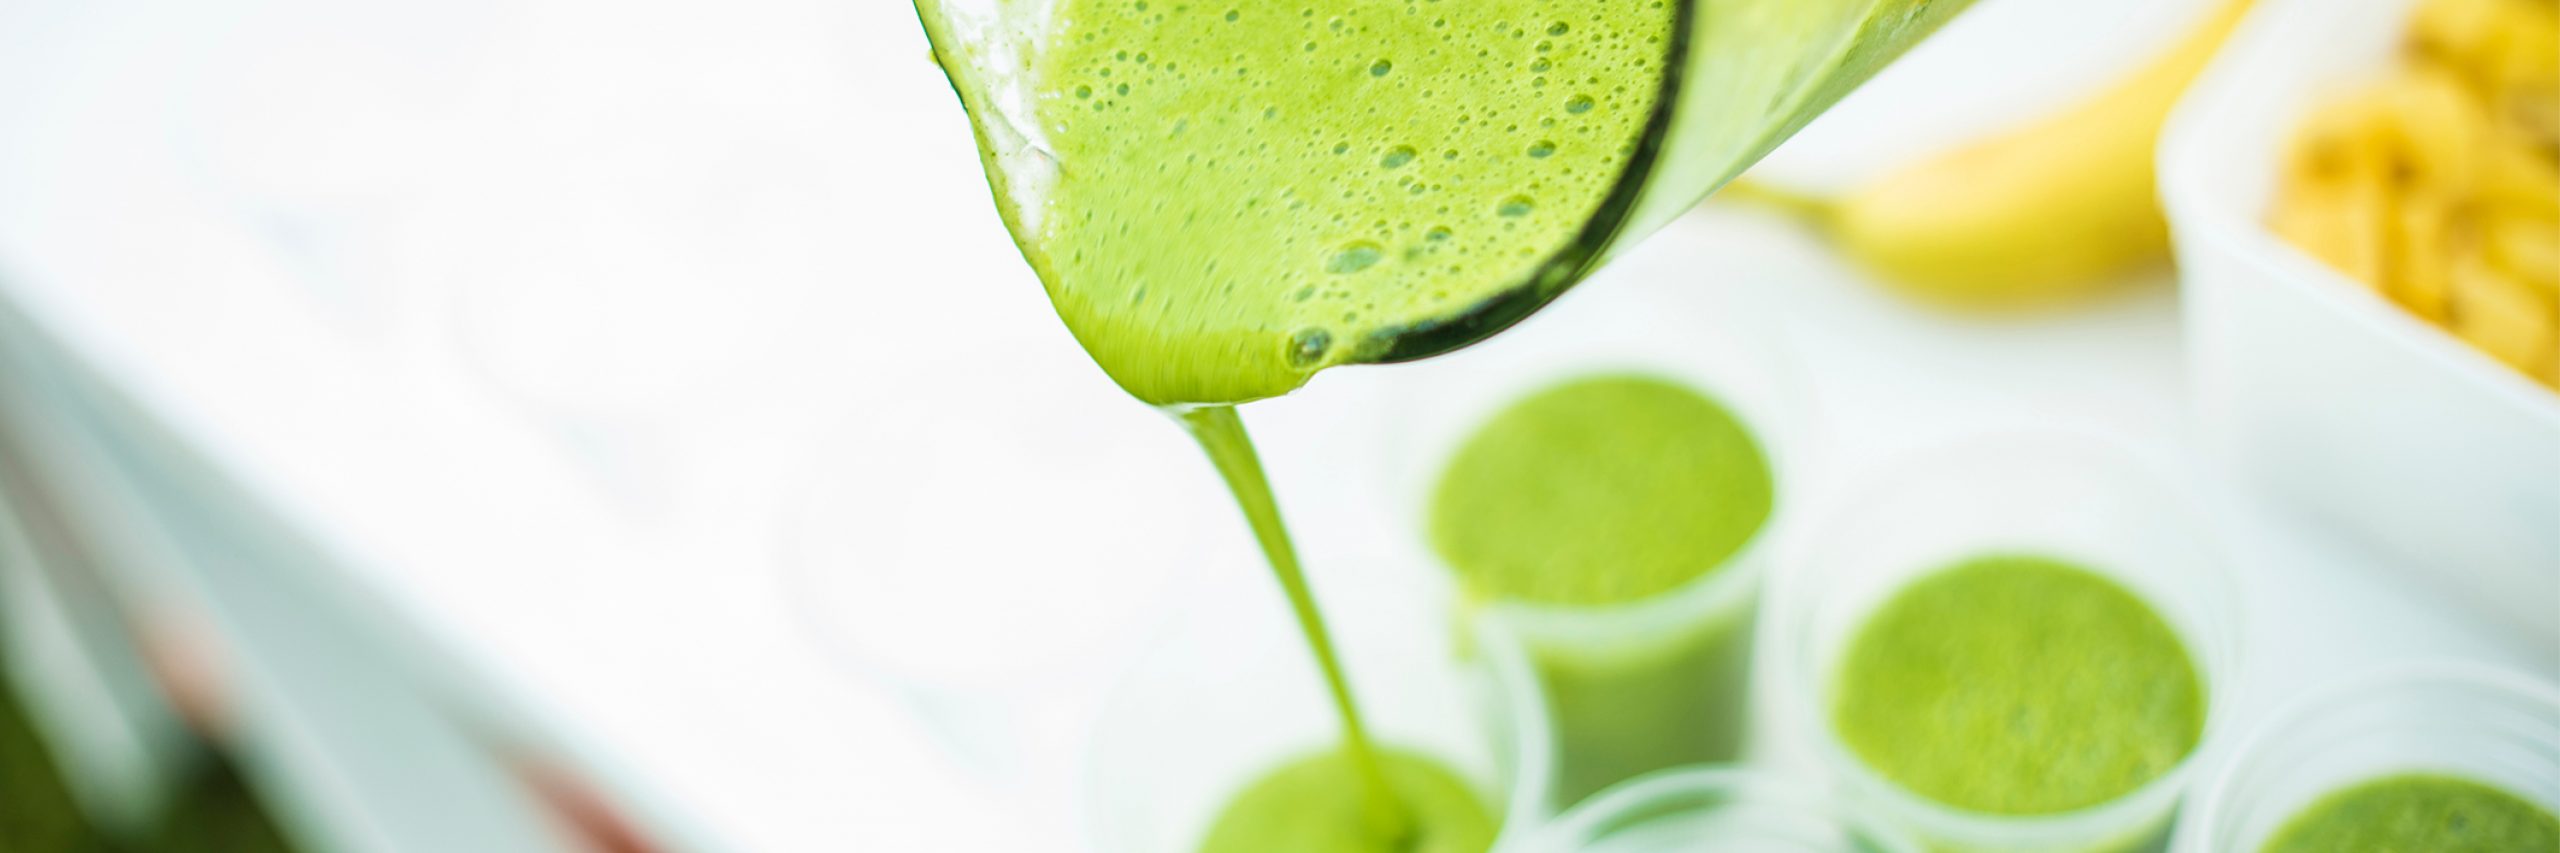 LeaderBrand Spinach smoothie recipe